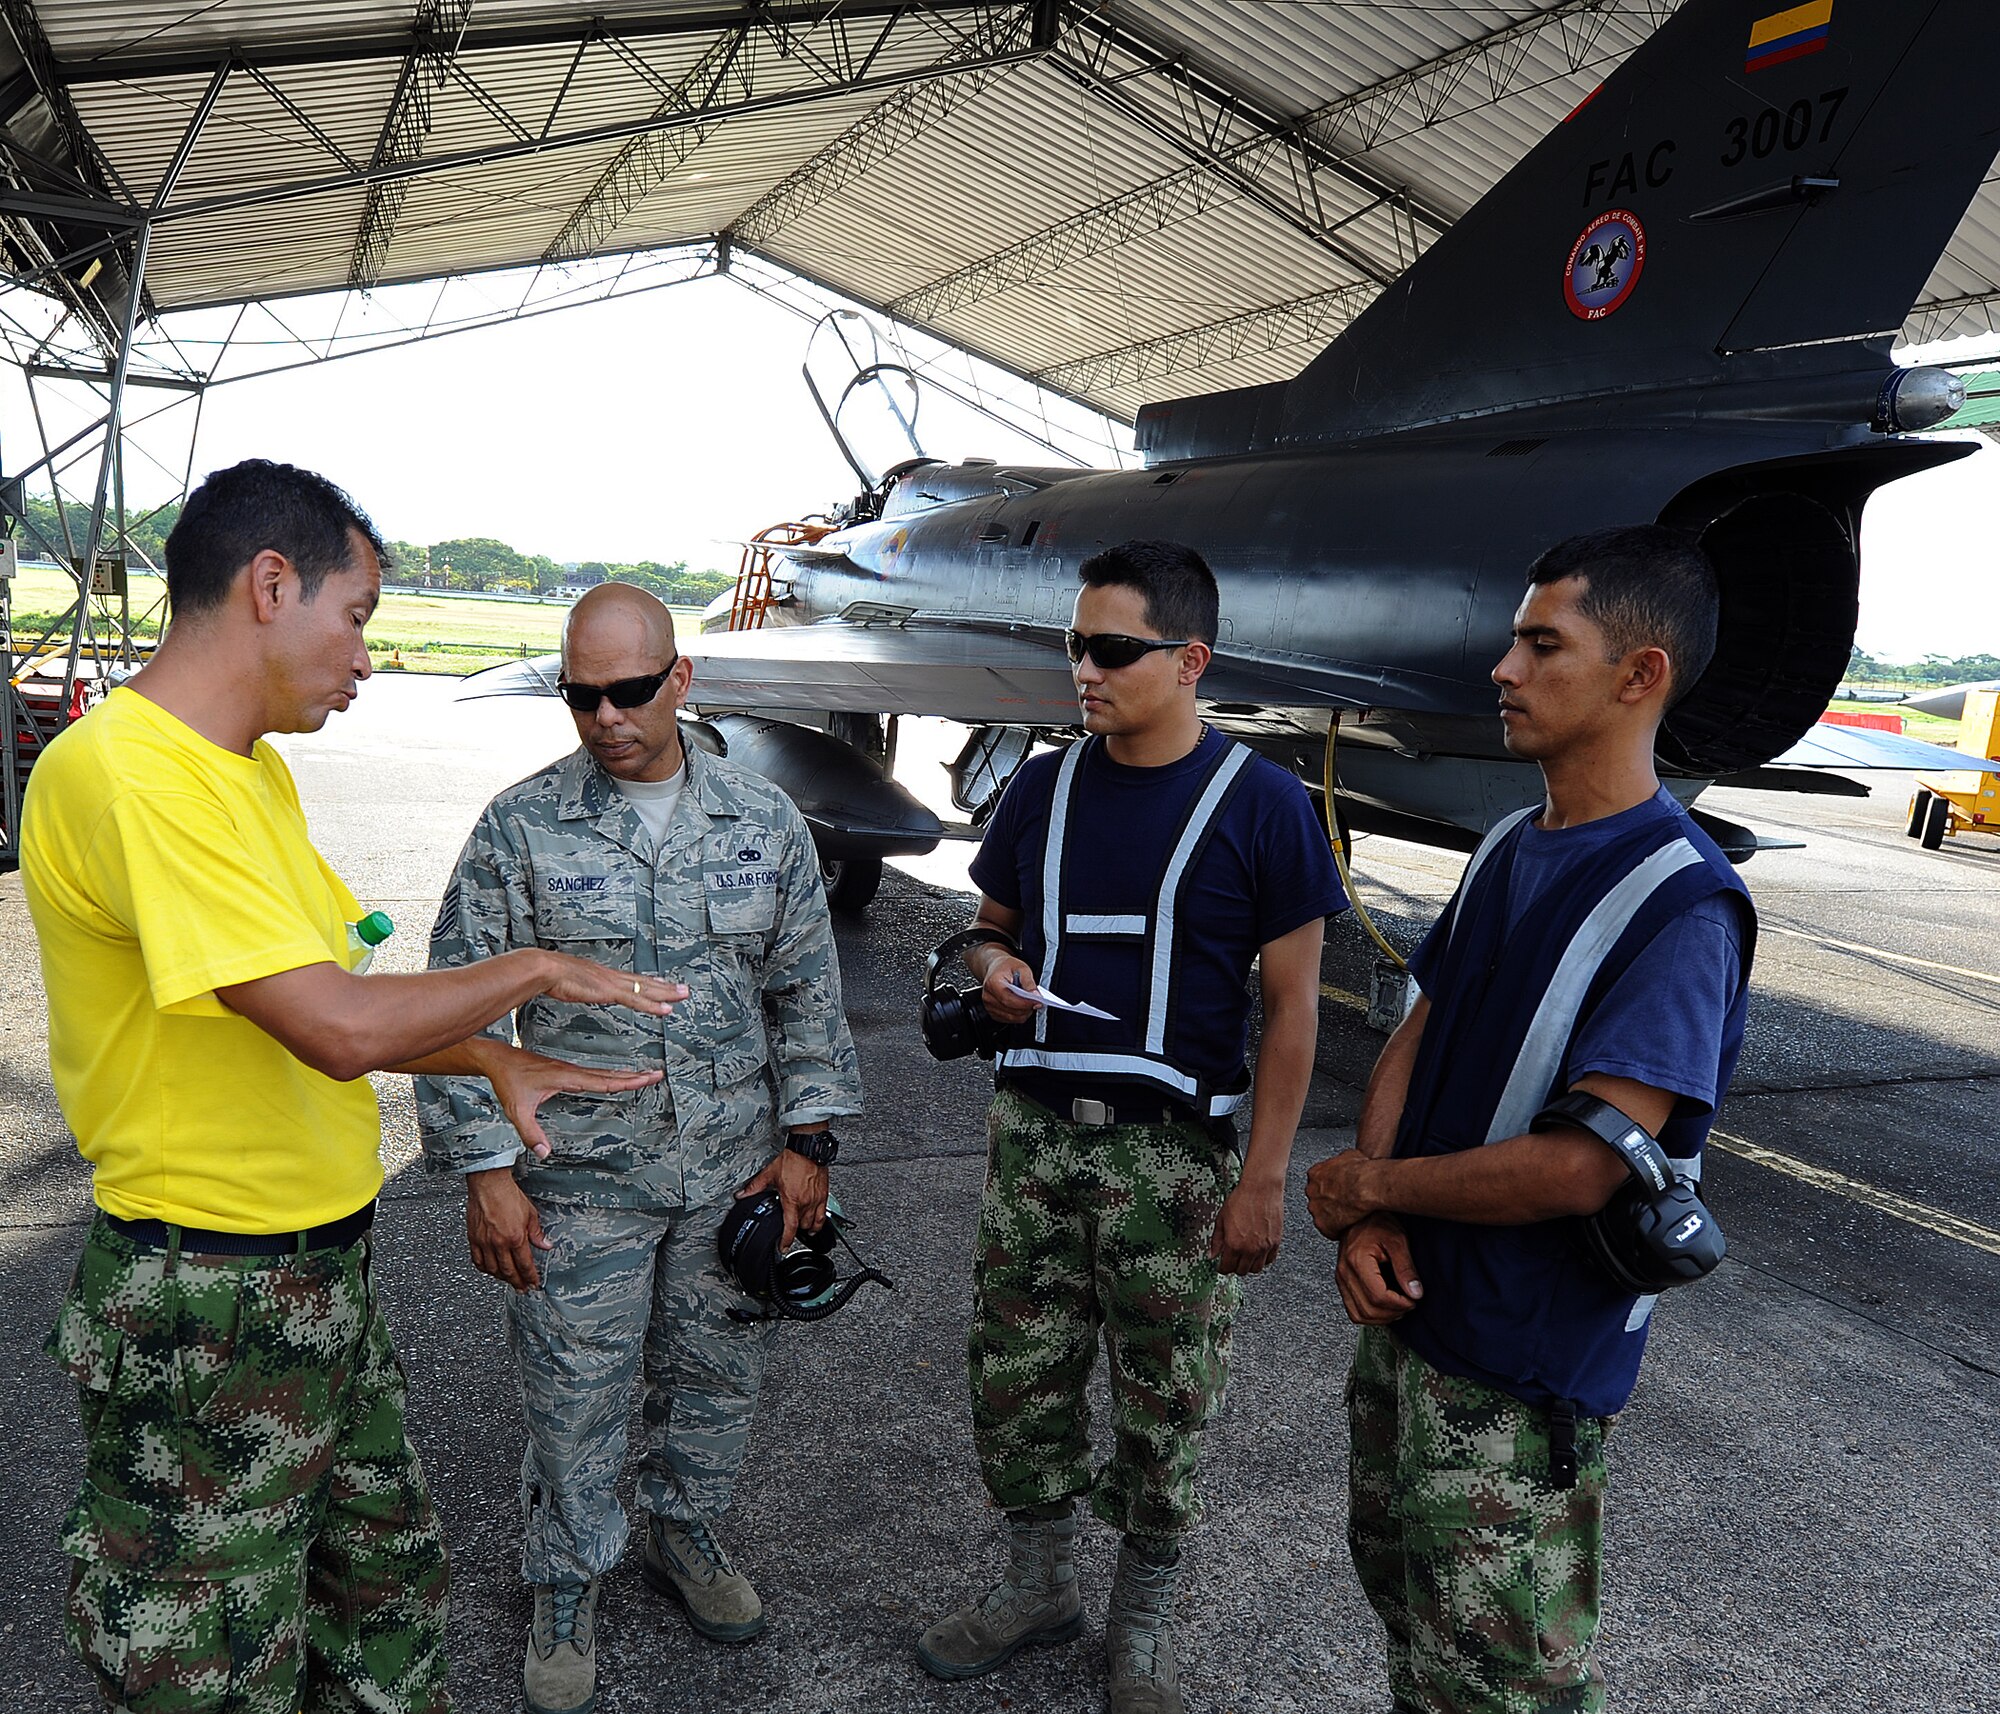 A Colombian air force crew chief explains to Tech. Sgt. Luis Sanchez, 571st MSAS aircraft maintenance air advisor, their aircraft launching procedures and communications with MOC prior to the evening's flights June 15, at Comando Aéreo de Combate No. 1 base, Palanquero, Colombia, as part of a month-long Air Mobility Command Building Partner Capacity mission. (U.S. Air Force photo by Tech. Sgt. Lesley Waters)